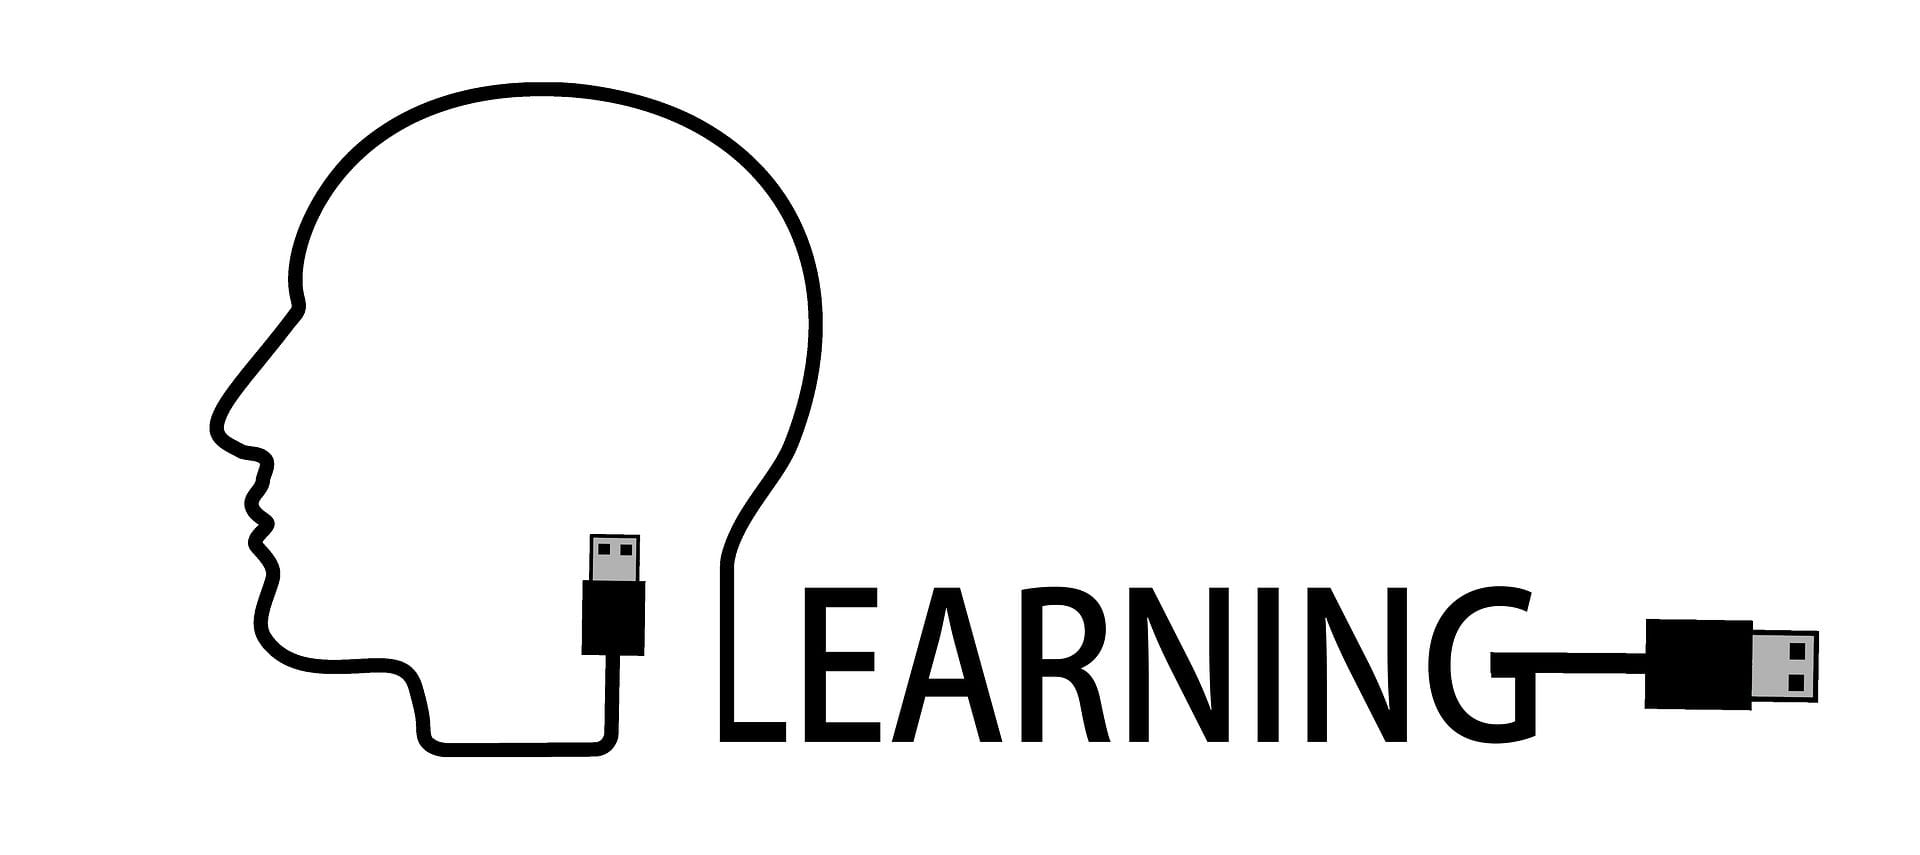 Free online micro-learning courses for busy educators